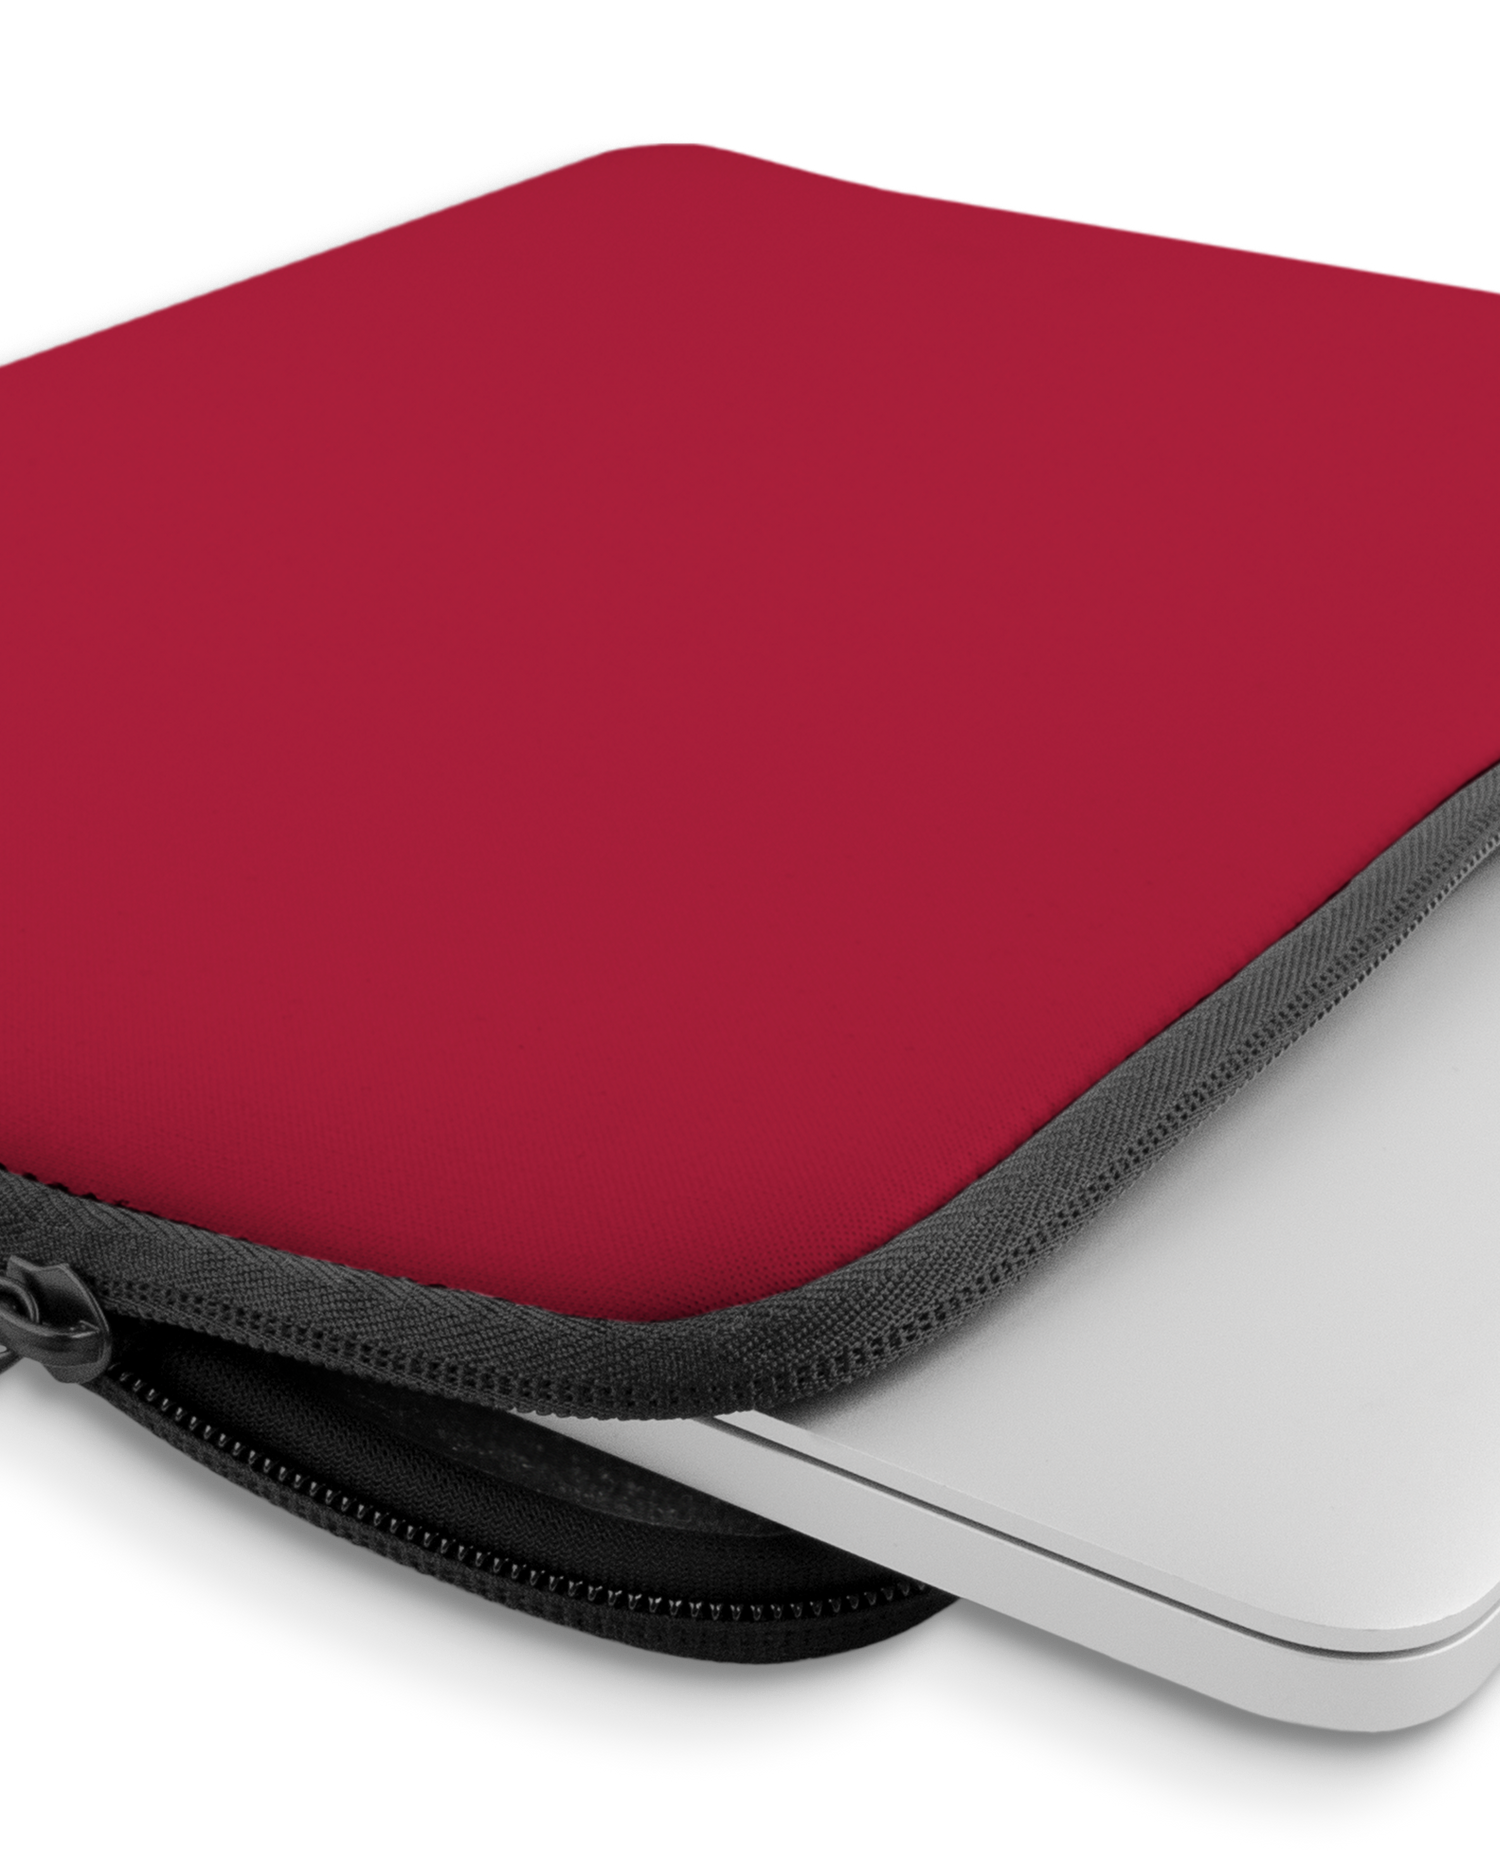 RED Laptop Case 13-14 inch with device inside